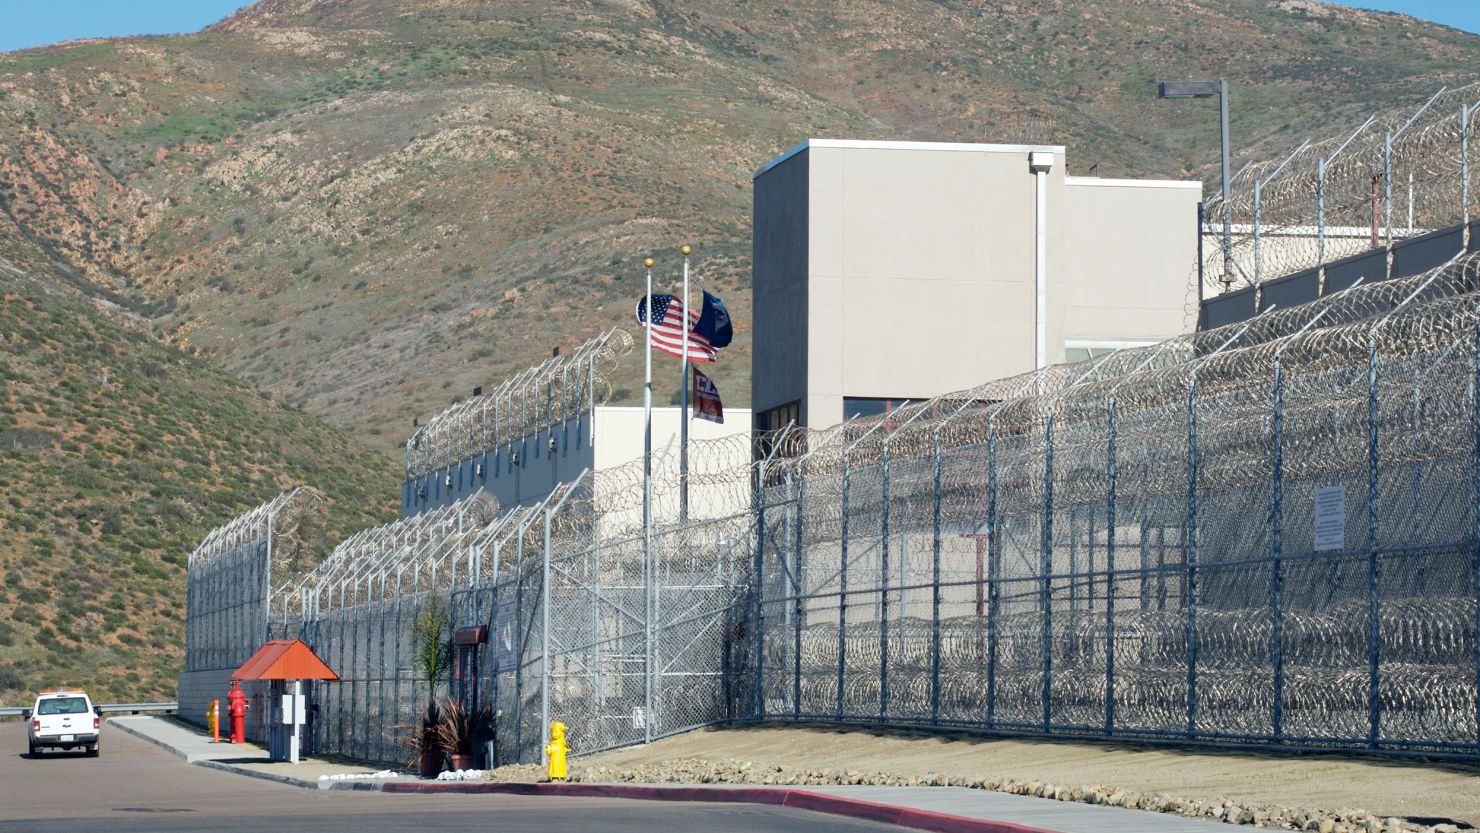 More than 130 detainees at the Otay Mesa Detention Center have tested positive for the novel coronavirus, according to Immigration and Customs Enforcement.